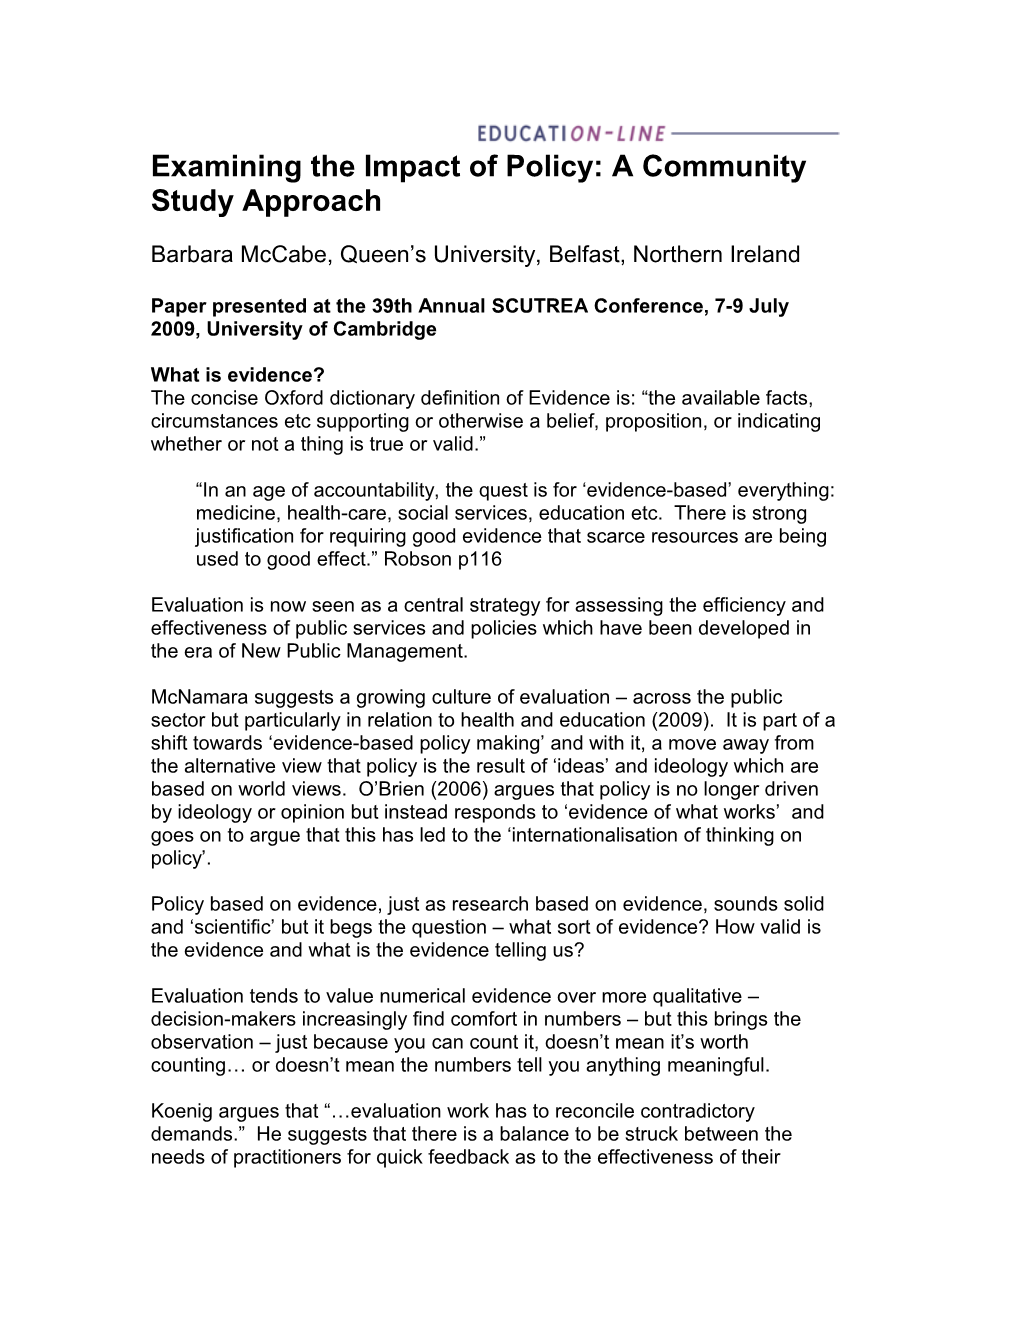 Examining the Impact of Policy: a Community Study Approach